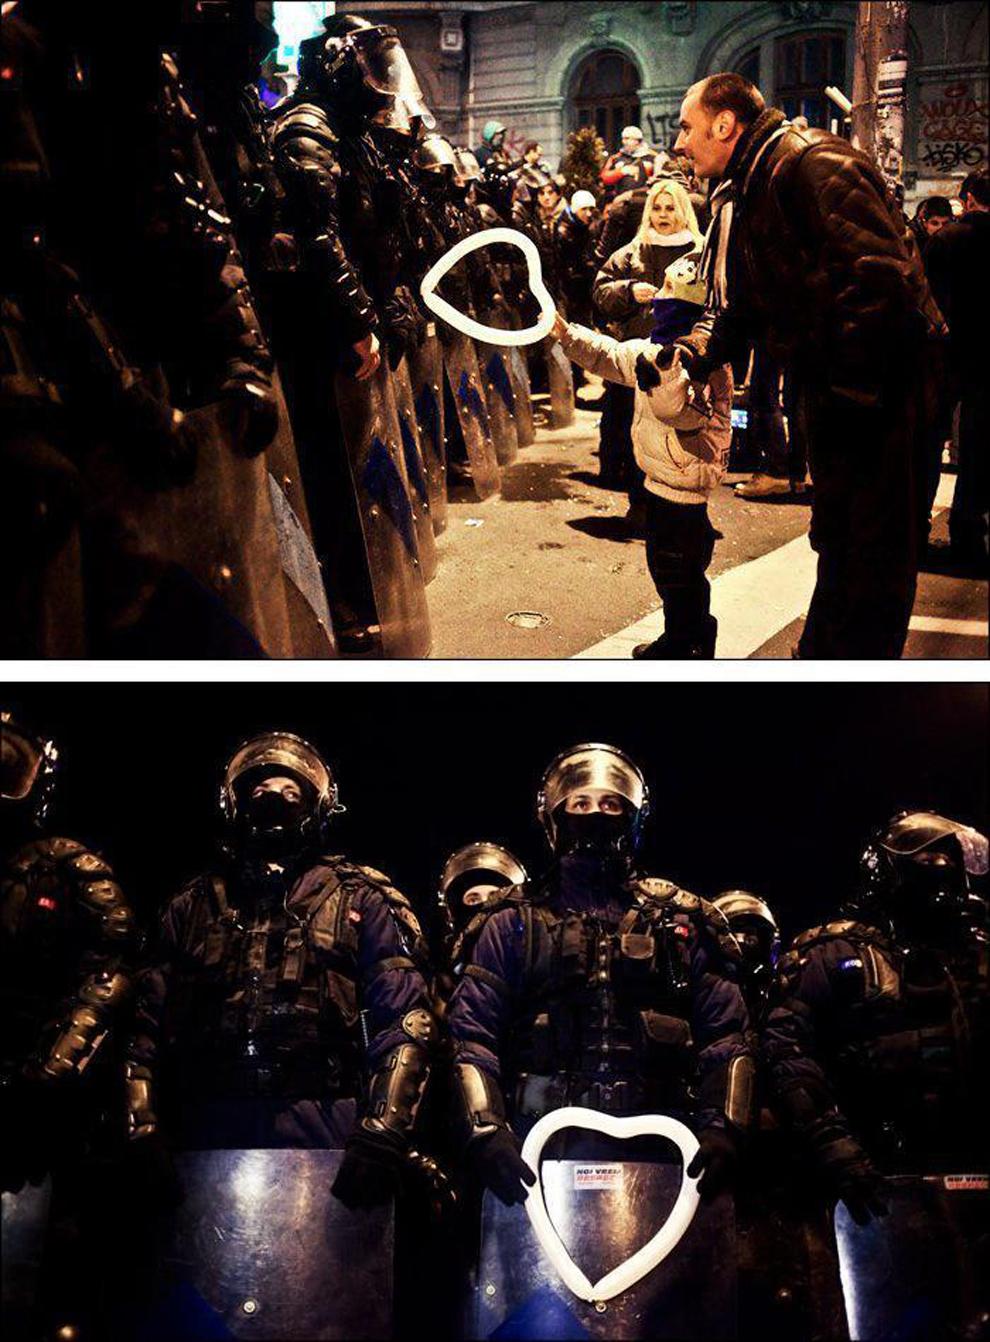 A young boy offers a heart-shaped balloon to police. Bucharest, Romania, 2012